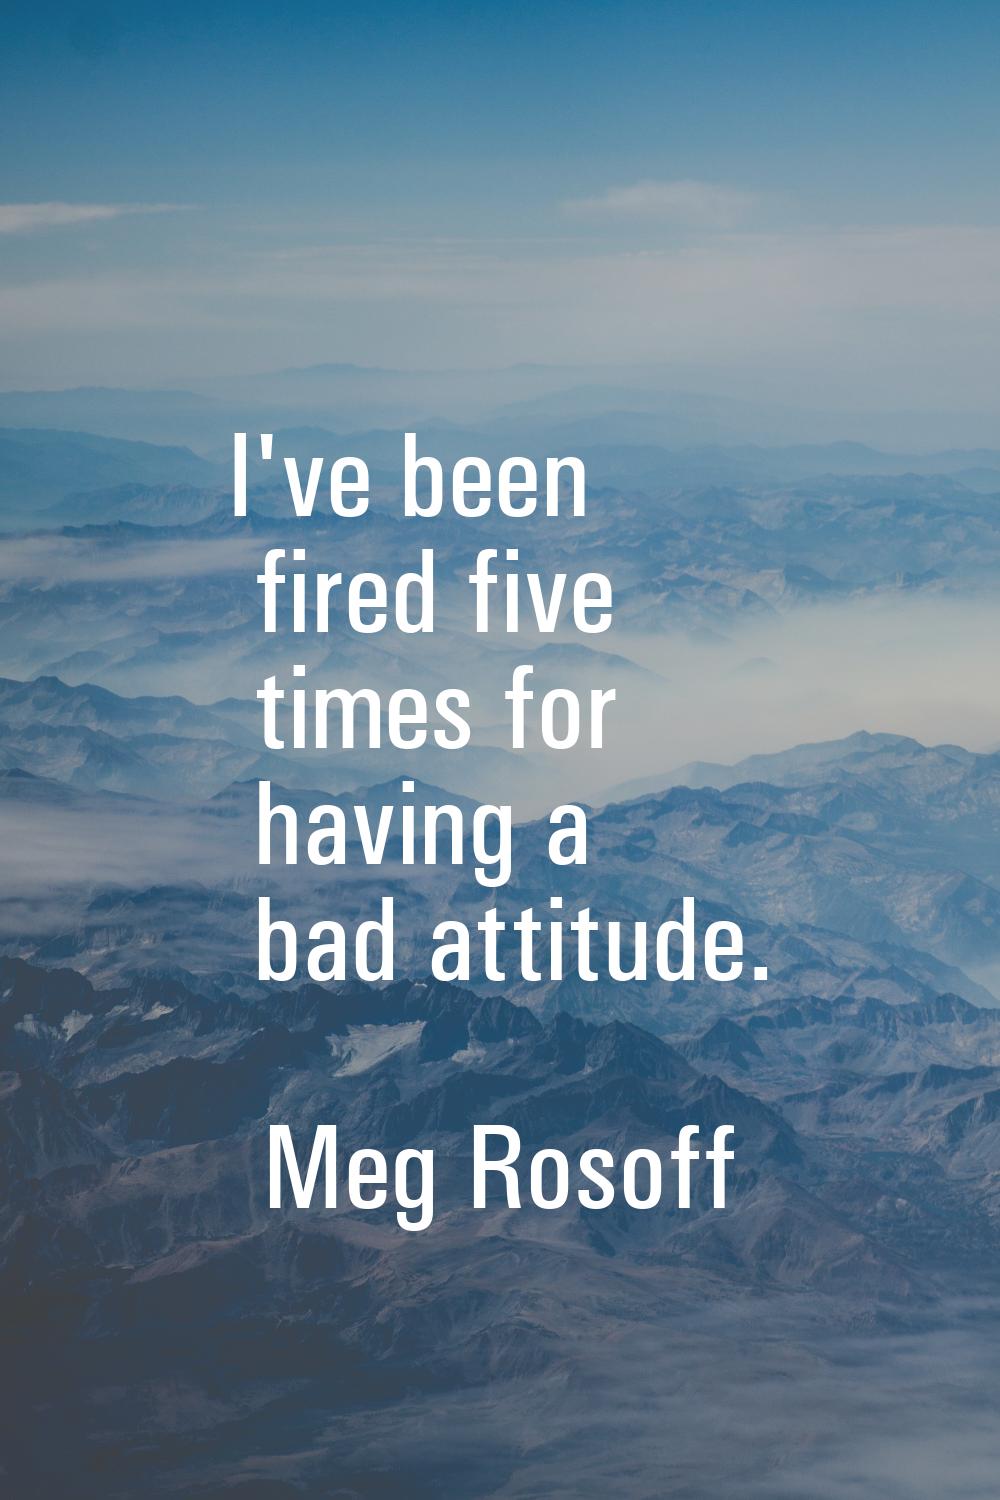 I've been fired five times for having a bad attitude.